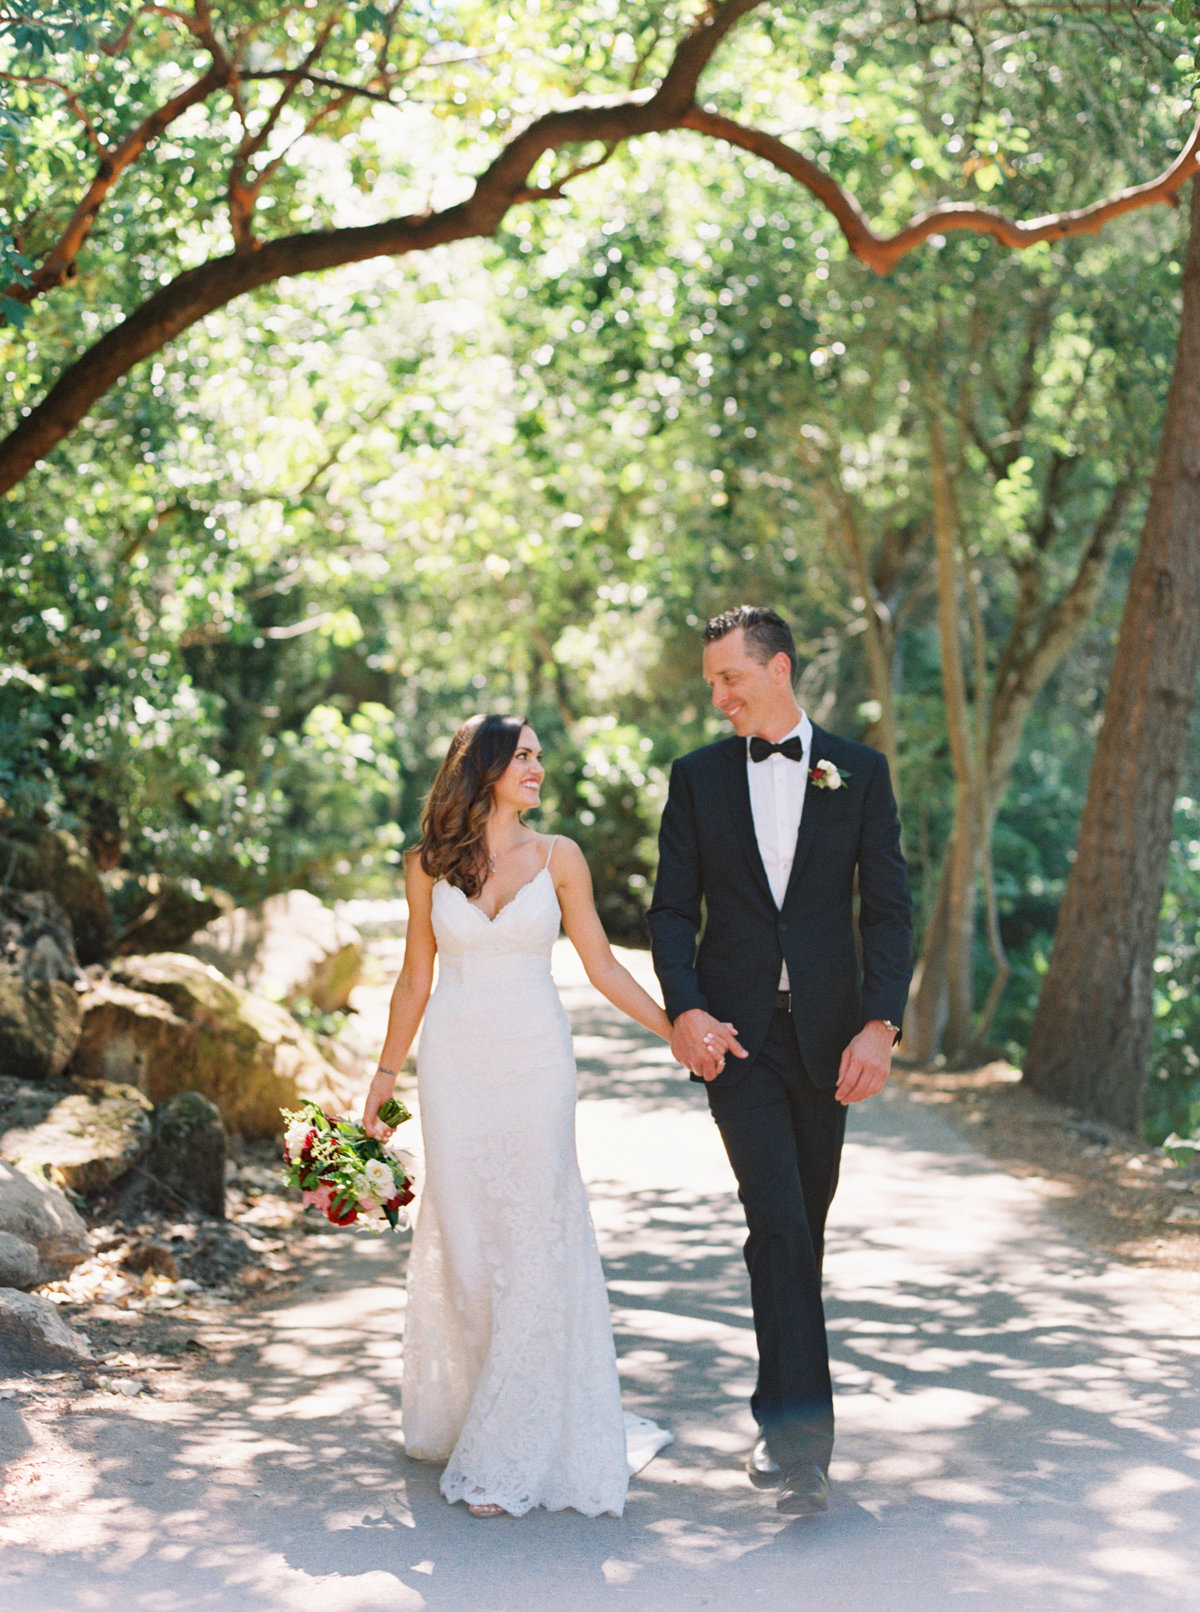 Angie + Stephen Meadowood French Laundry Elopement Wedding - Cassie Valente Photography 0037